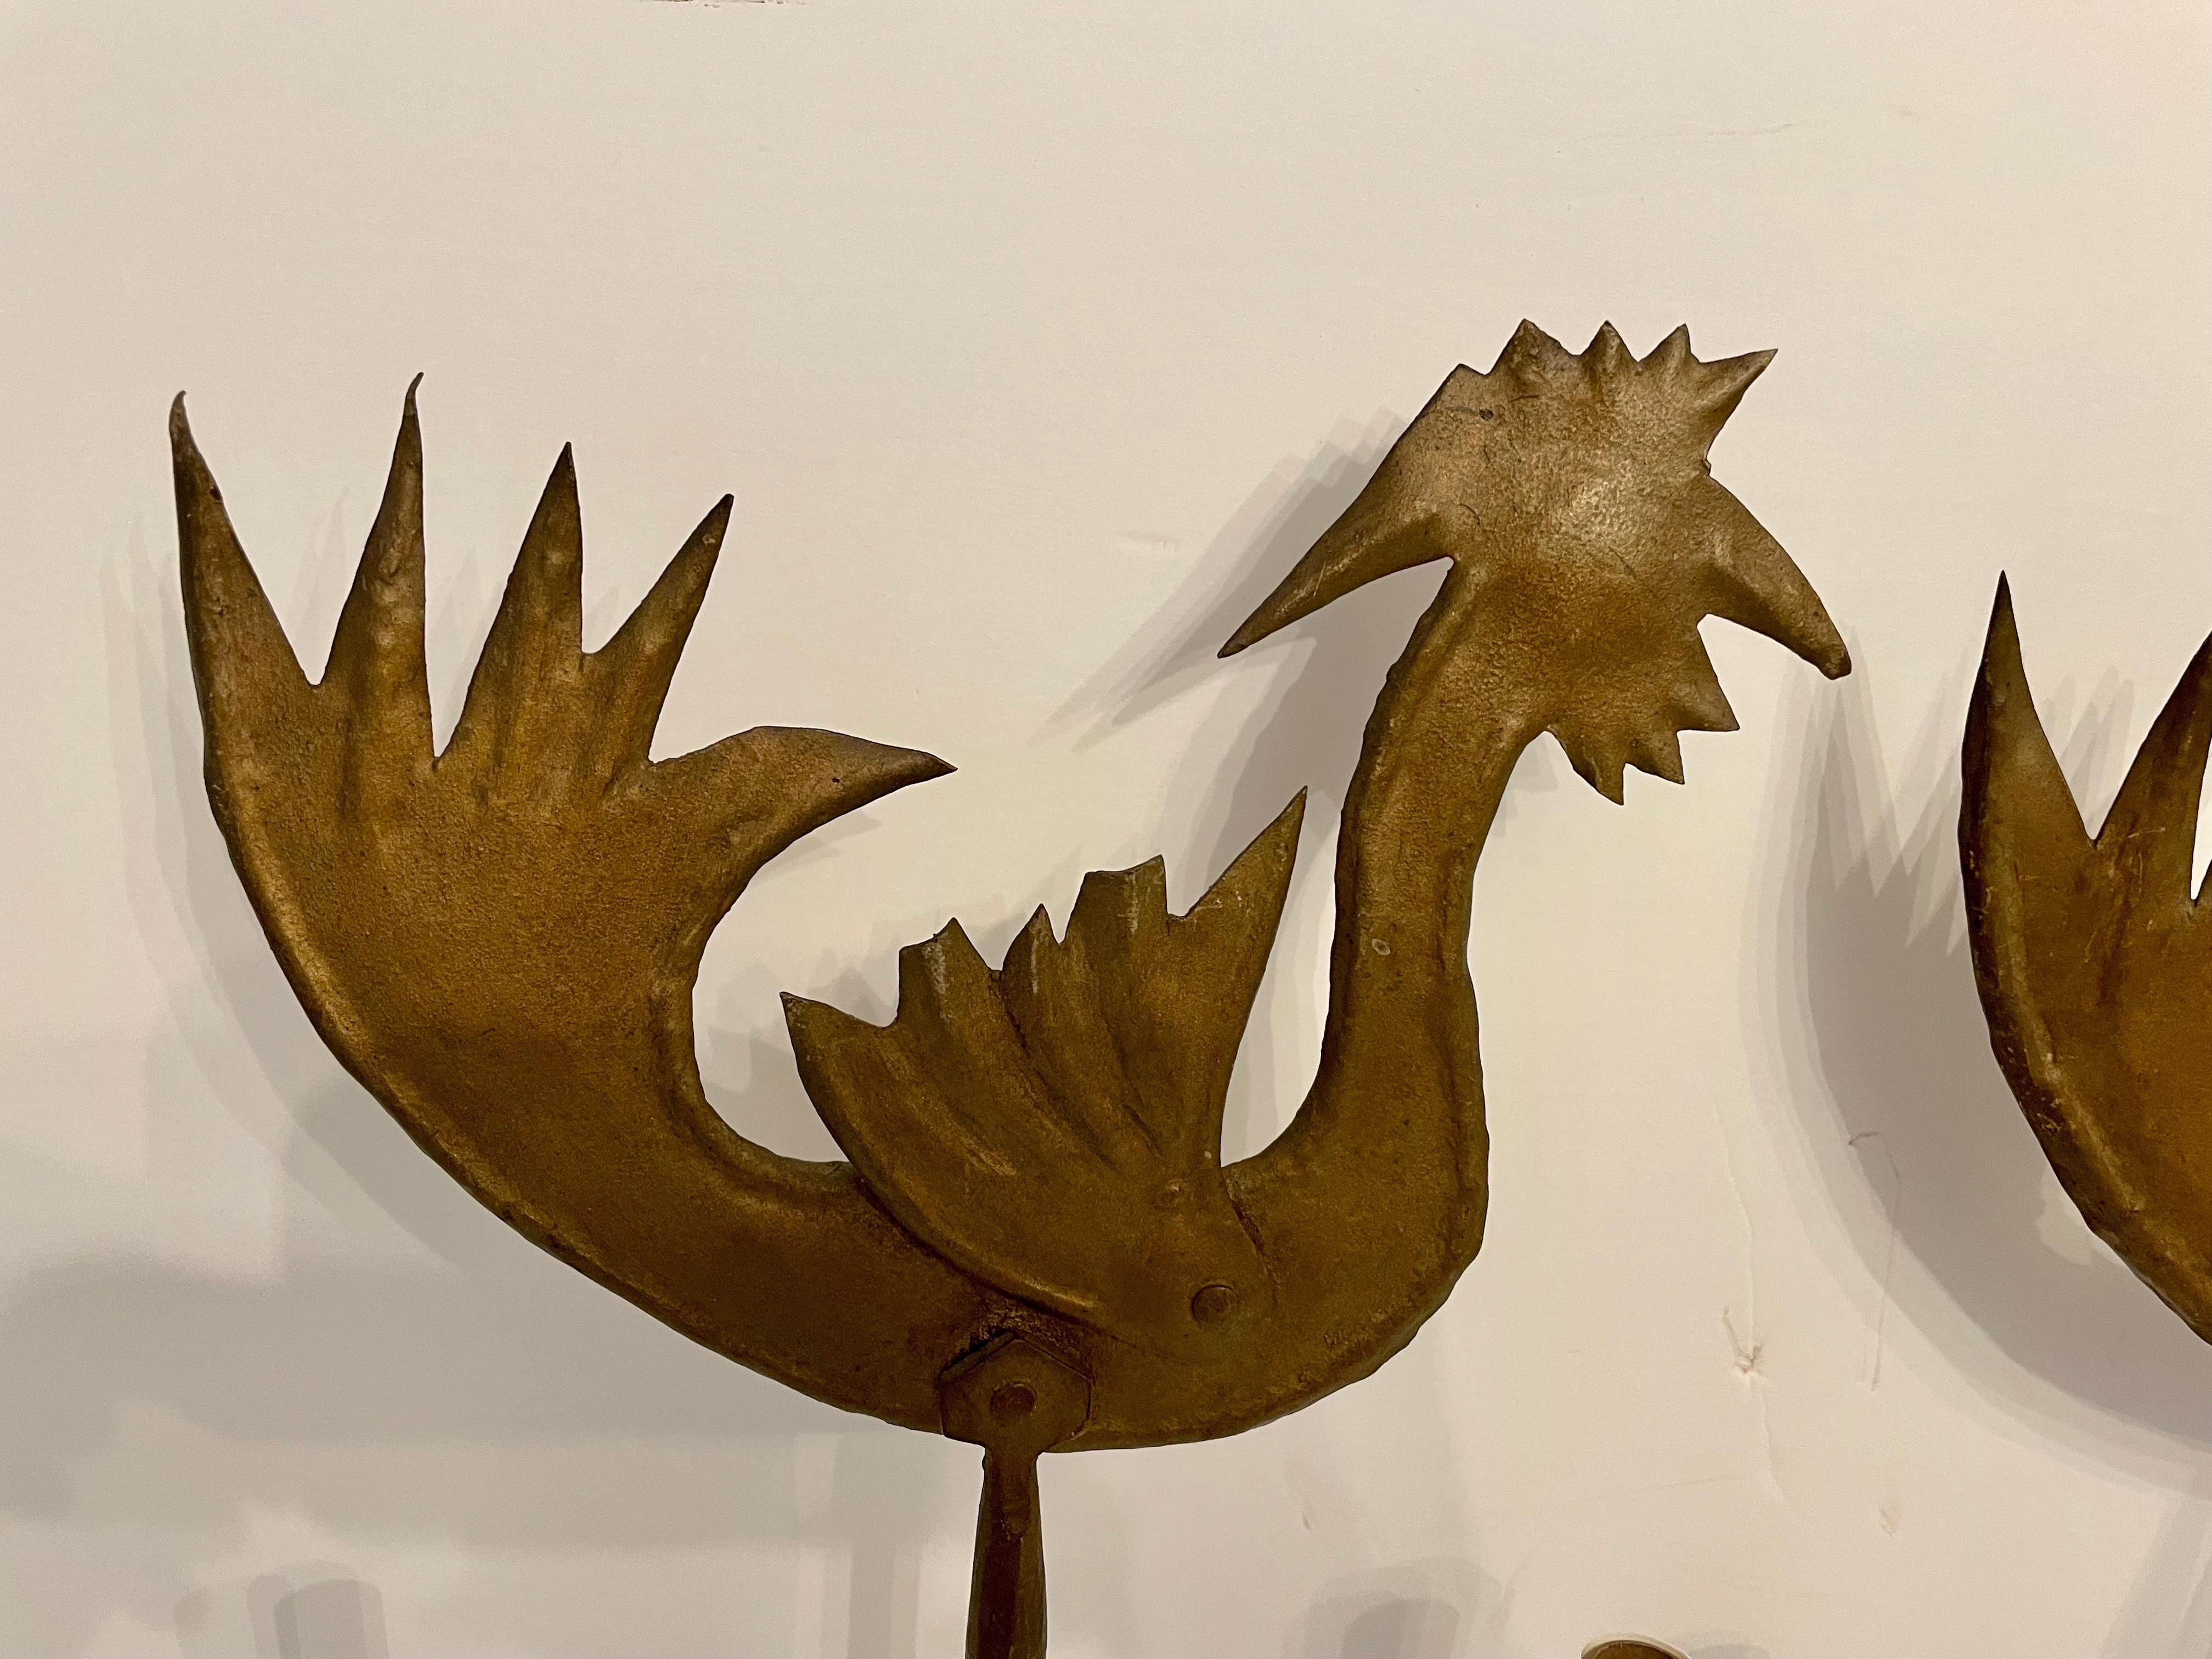 Pair handmade gilt iron rooster sconces. Two Arms each. Hand wrought iron with cut metal rooster, all with gilt finish. Some patina to finish. Wired, ready to use. Hook on back for hanging. Measures 26